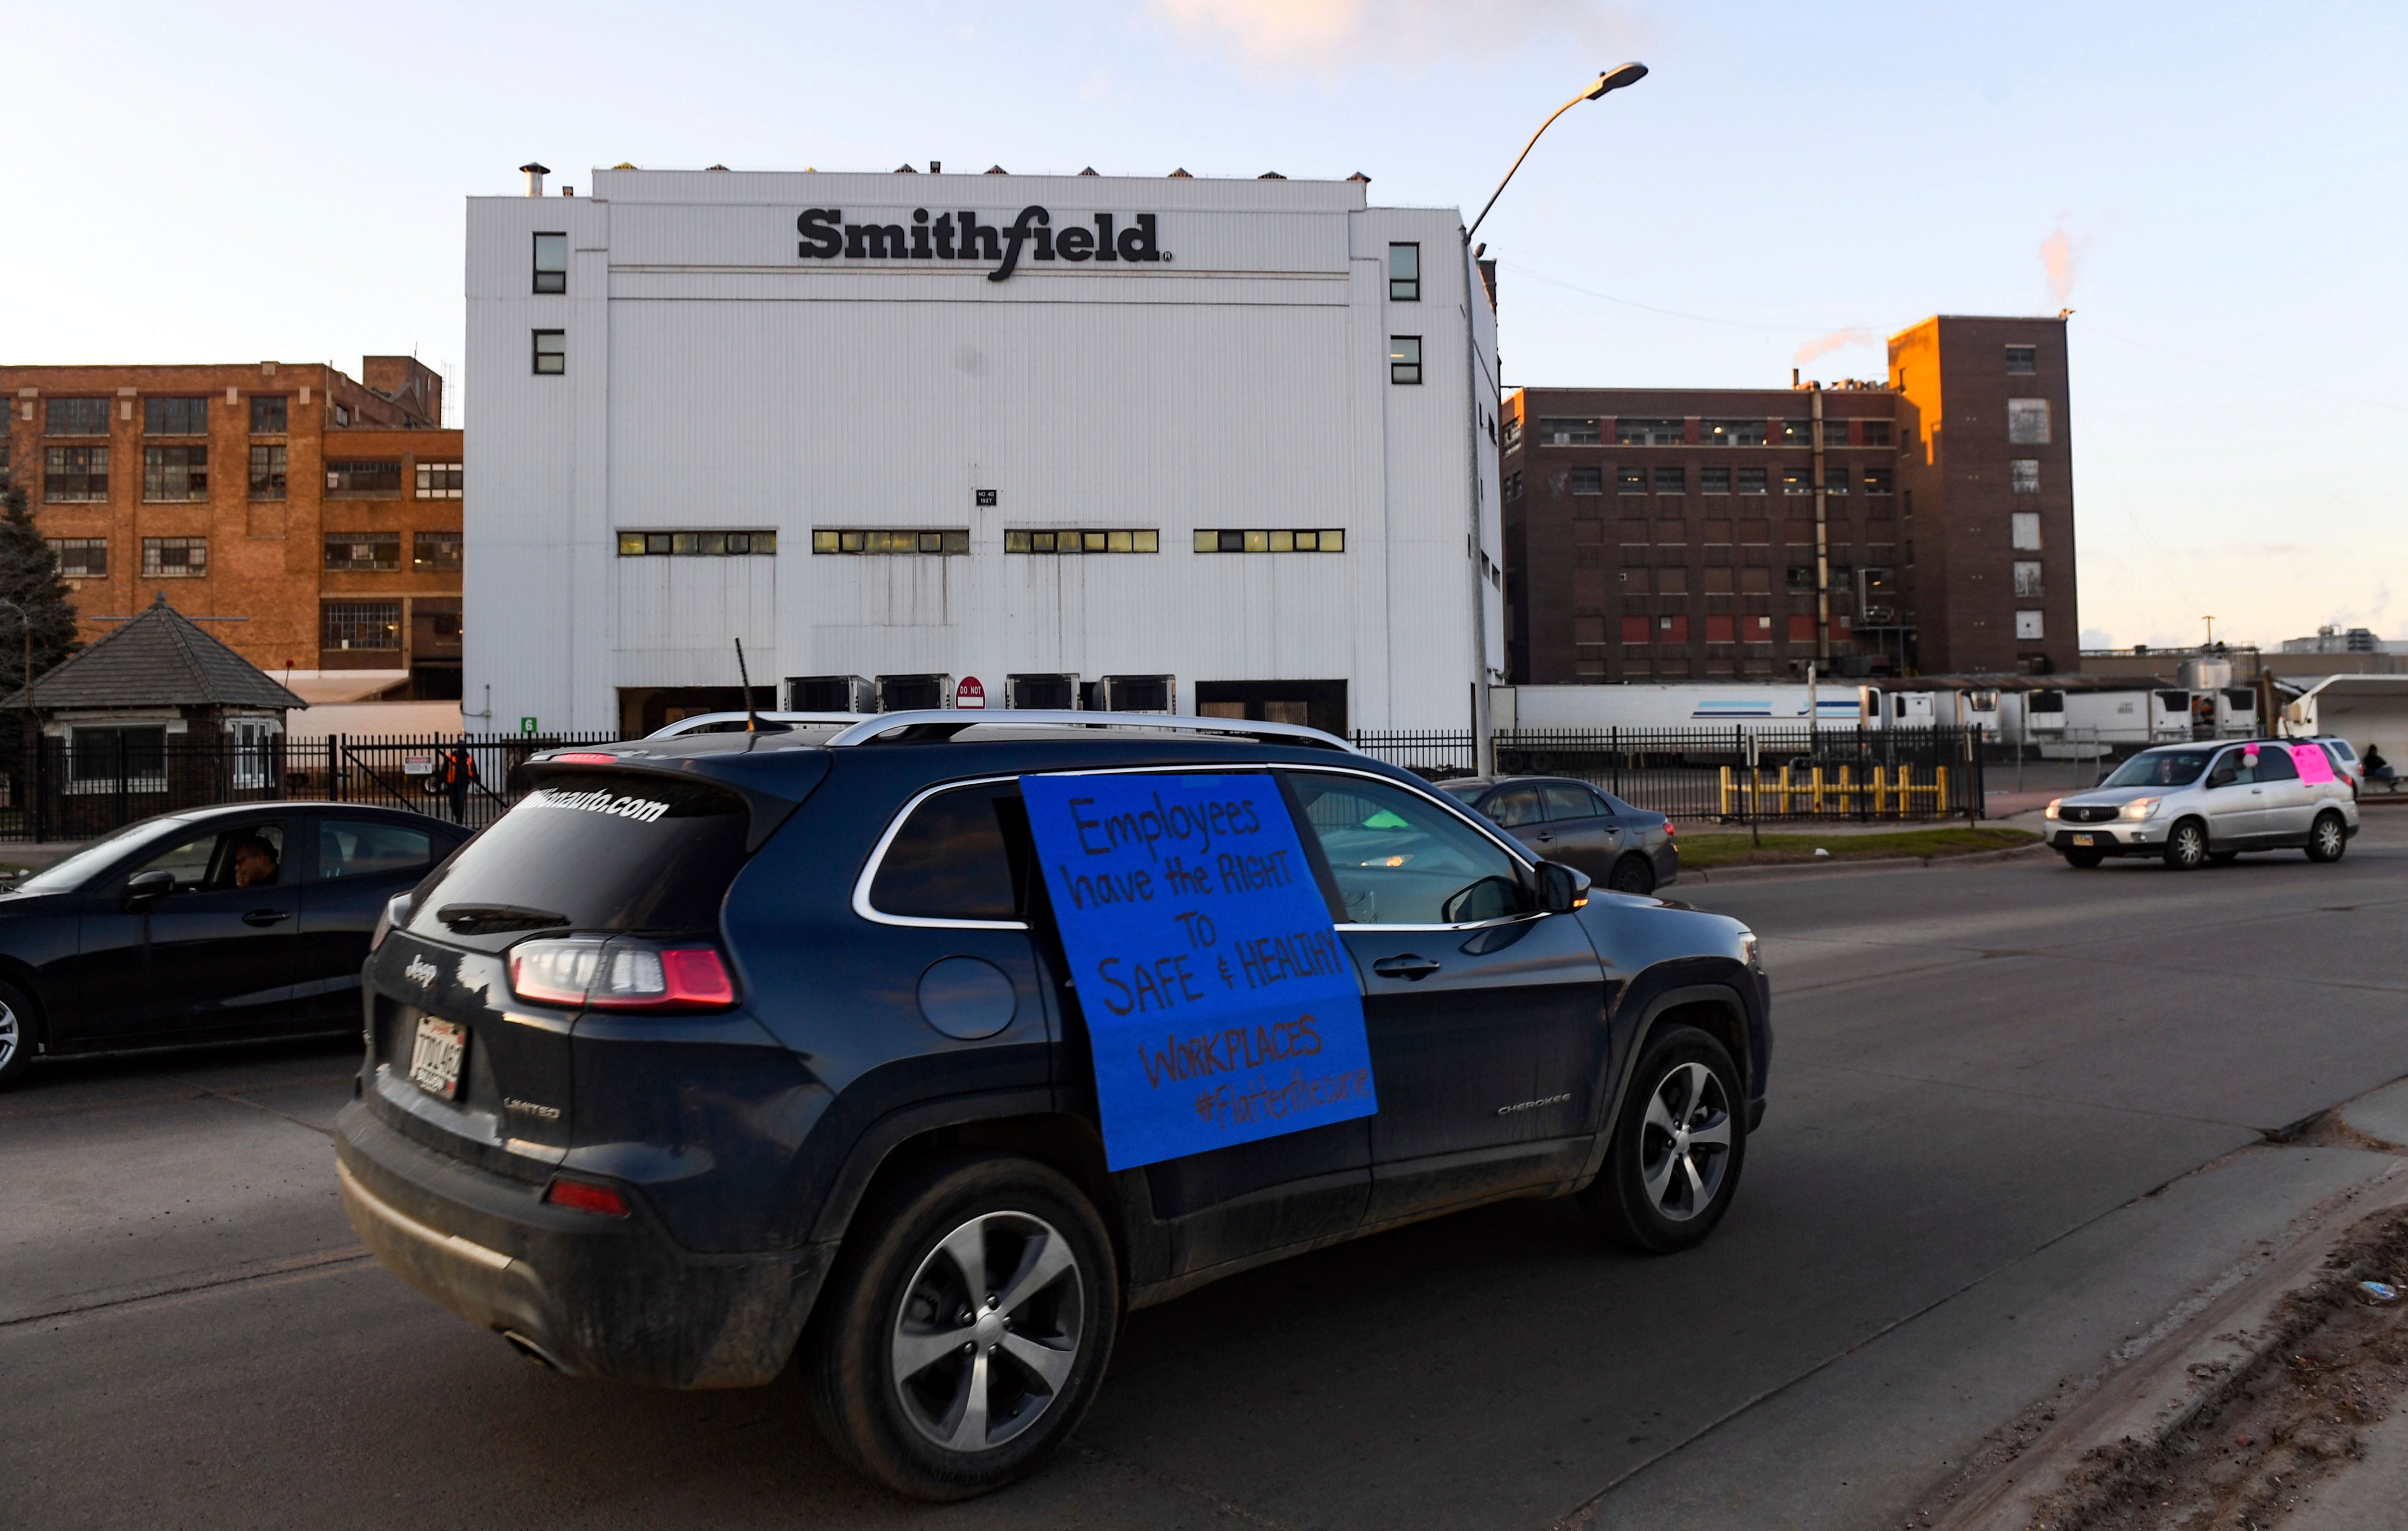 In this Thursday, April 9, 2020 photo, a car sporting a sign calling for a safe and healthy workplace drives past Smithfield Foods, Inc. in Sioux Falls. during a protest on behalf of employees after many workers complained of unsafe working conditions due to the COVID-19 outbreak. The pork processing plant in South Dakota is closing temporarily after more than 80 employees tested positive for the coronavirus. (Erin Bormett–The Argus Leader/AP)